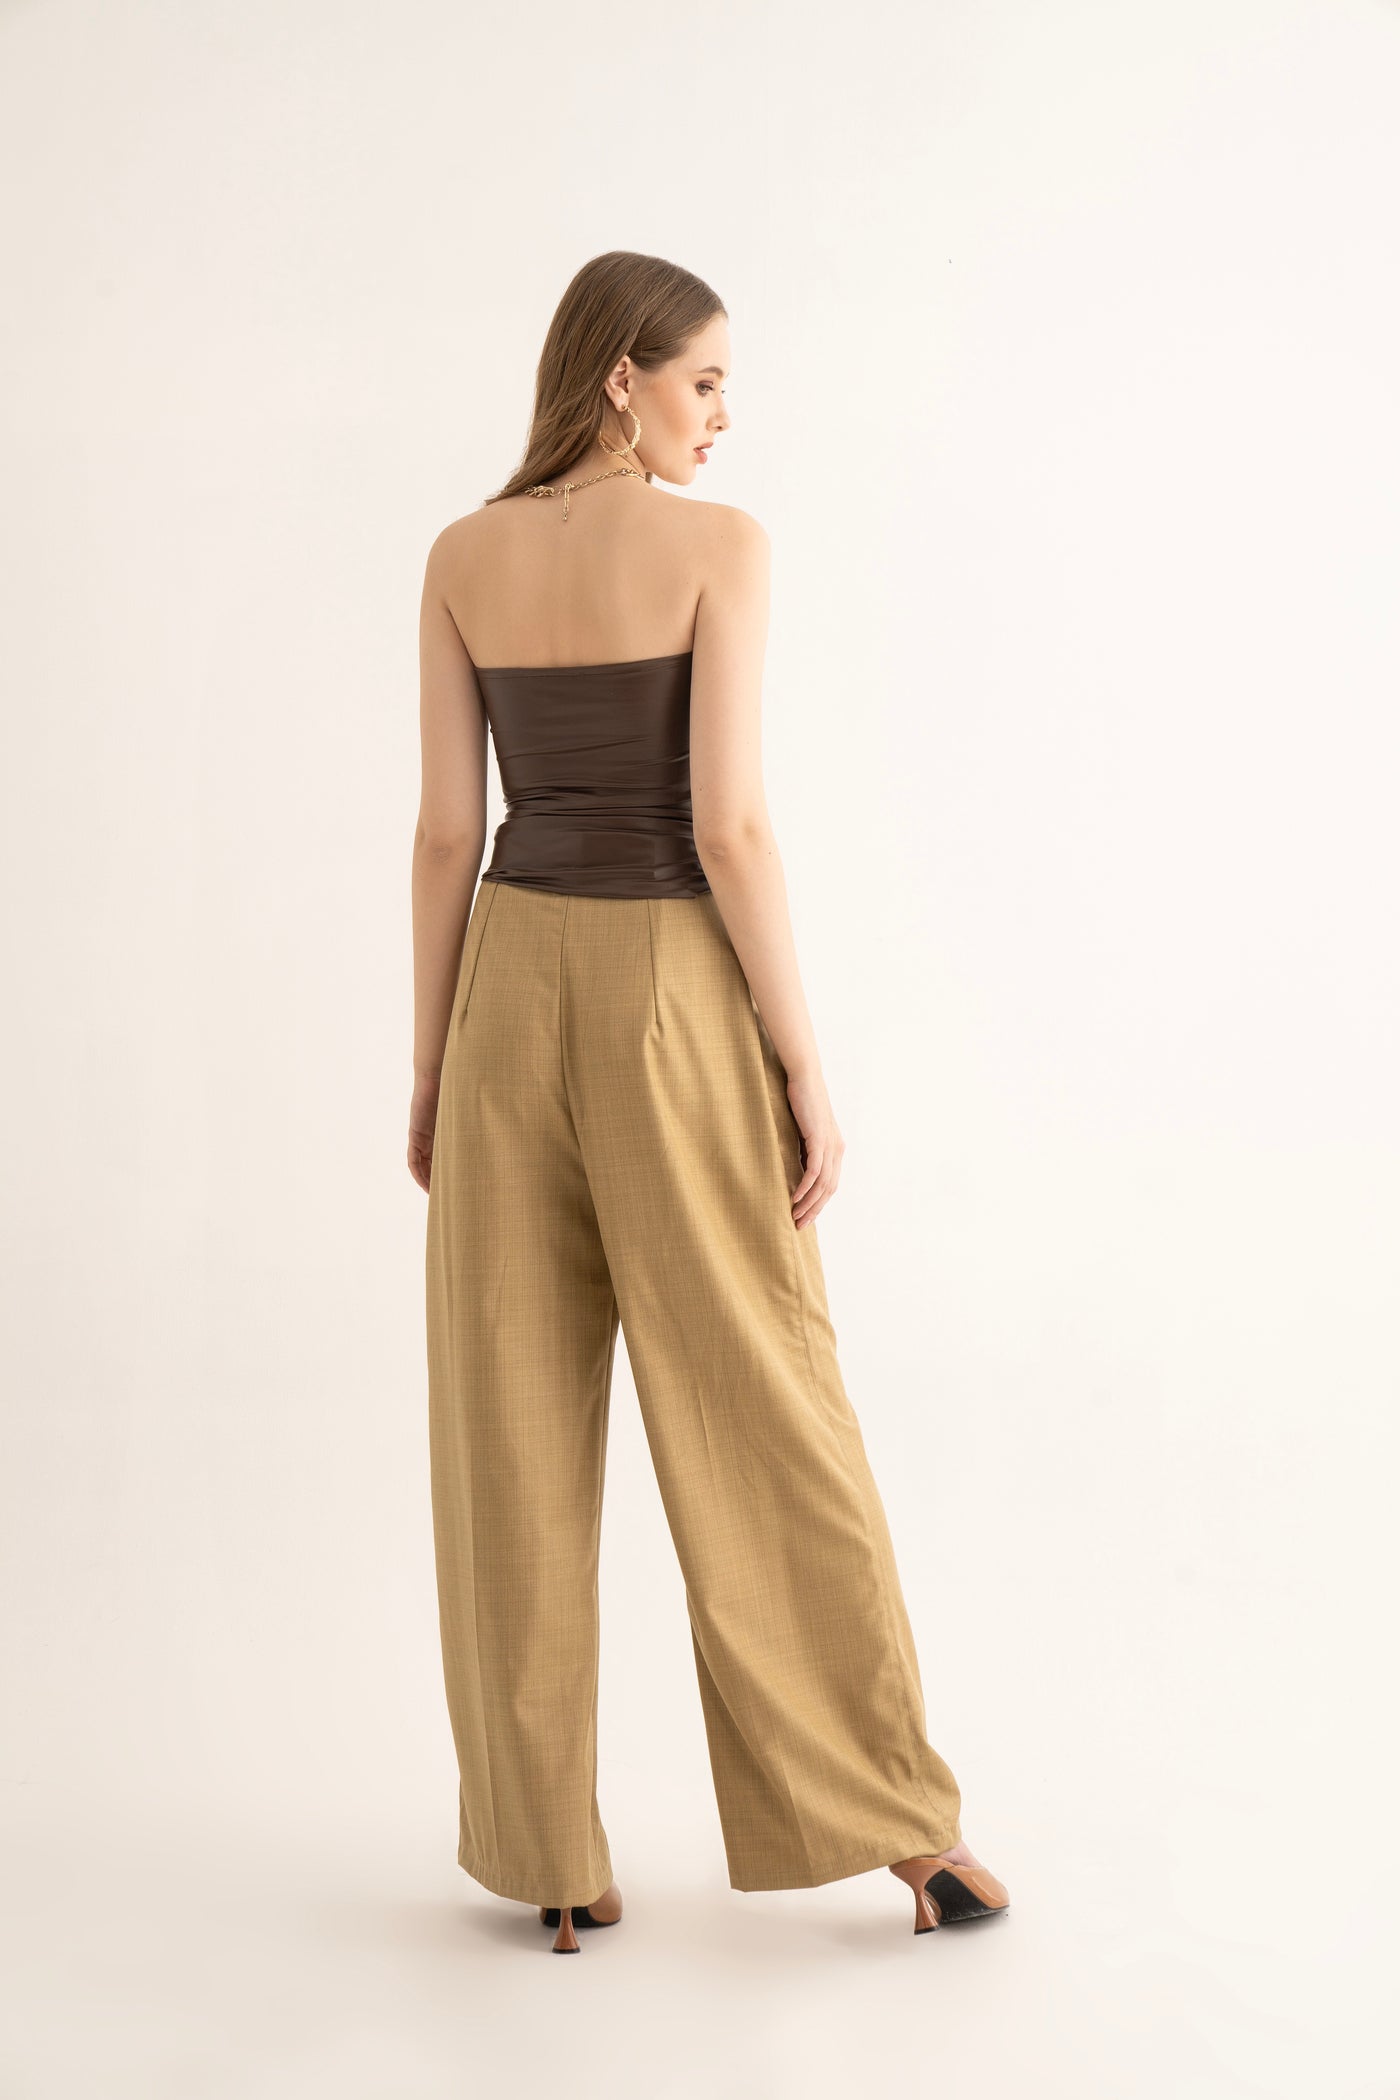 Brown Gathered Tube Top and Suiting Pants Co-ord